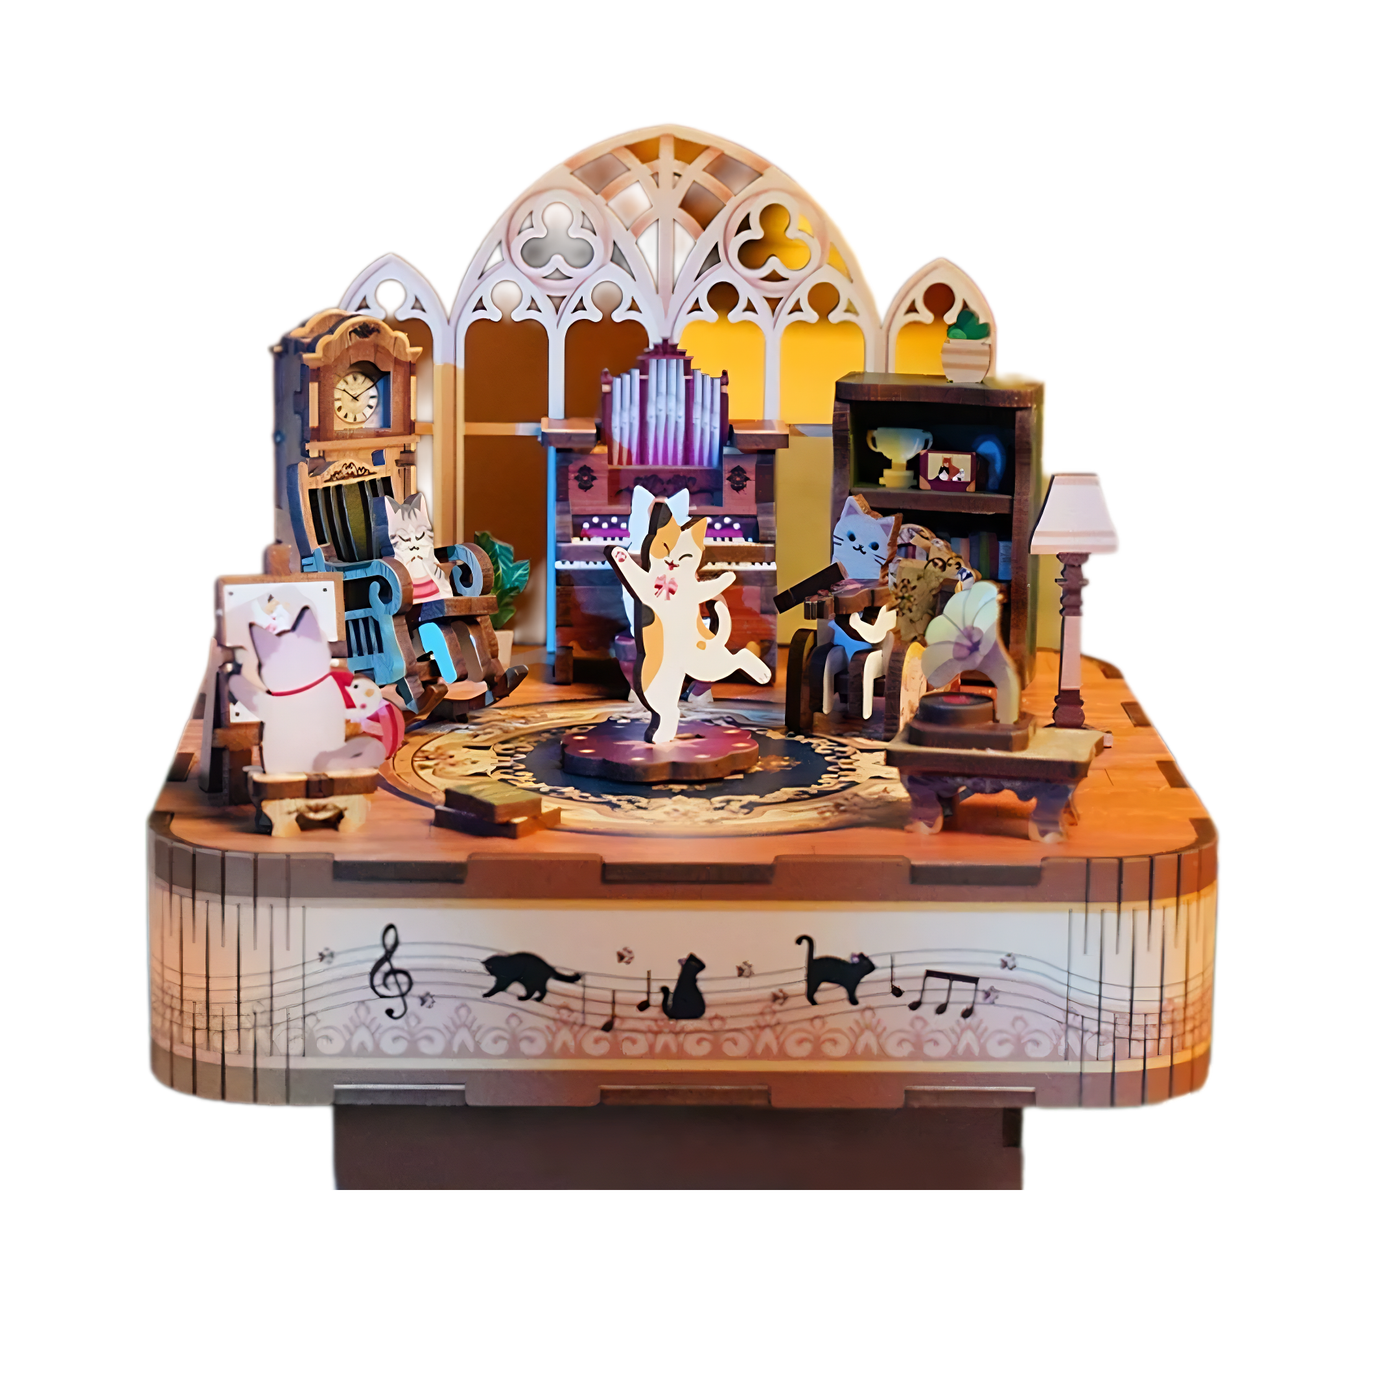 rokrgeek Gathering of Cats 3D WOODEN Puzzle Music Box